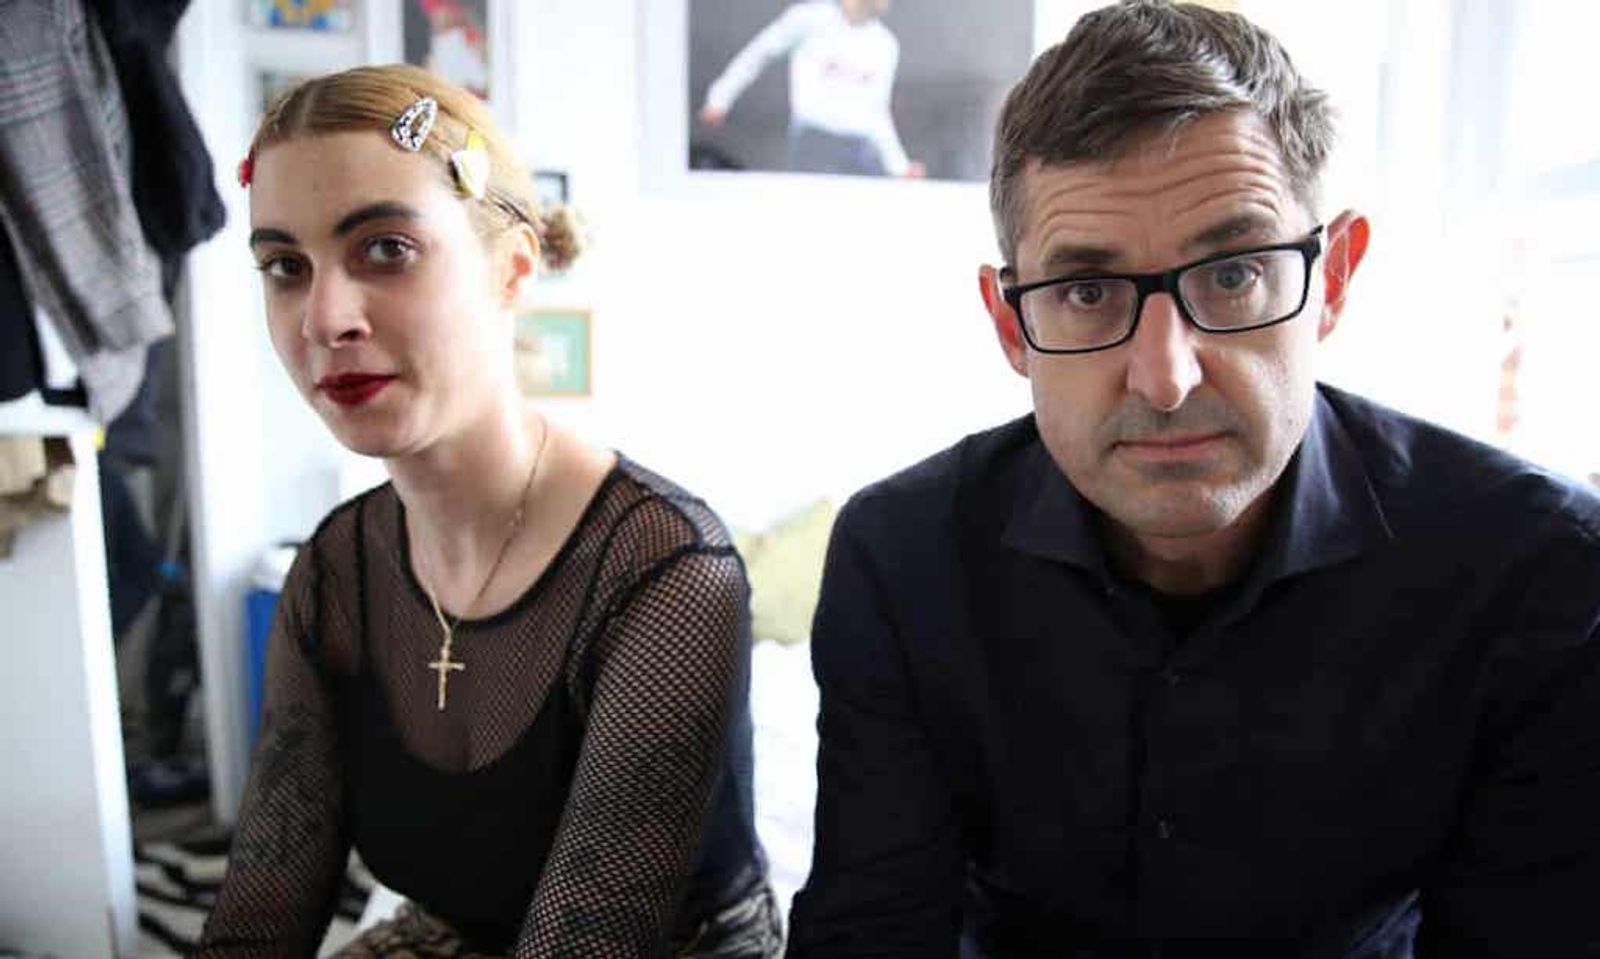 New Louis Theroux Sex Work Doc ‘Selling Sex’ Debuts on BBC Monday